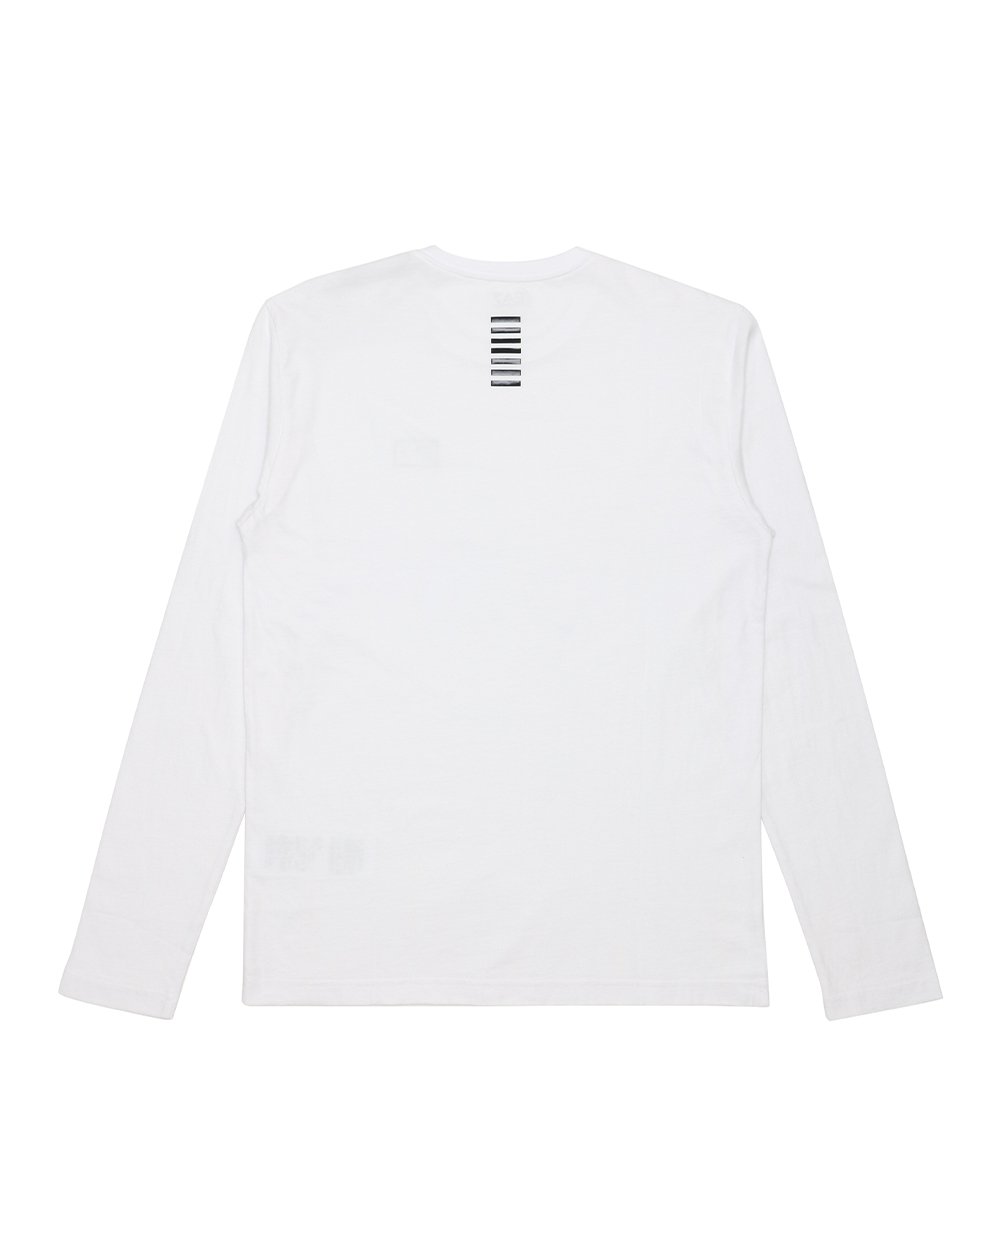 Cotton Long-Sleeves Round Neck T-shirt - ISSI Outlet